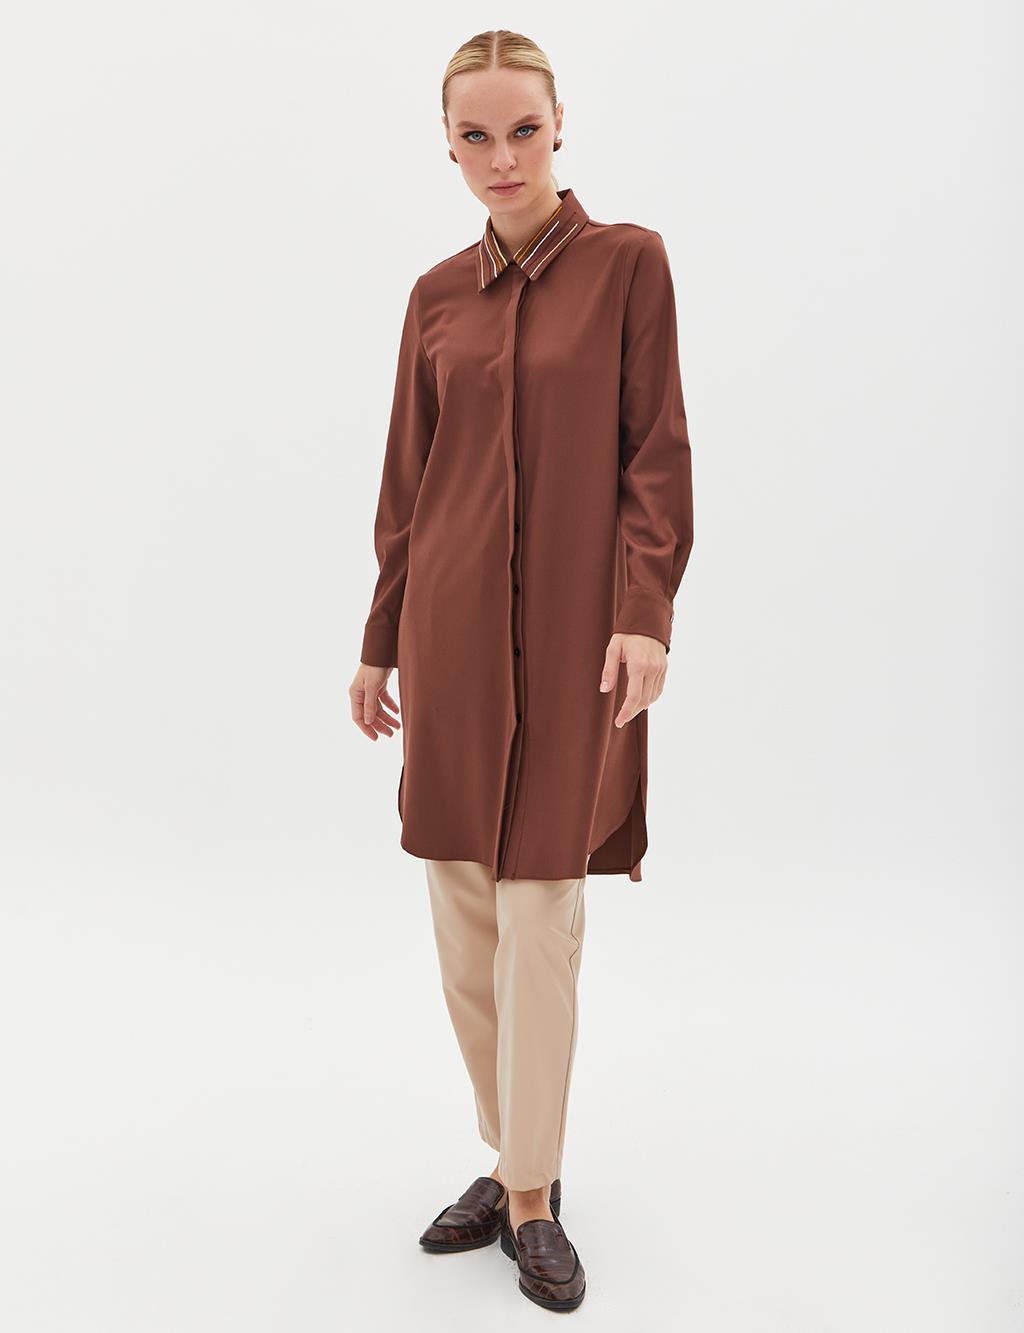 Woven Design Stamp Tunic Brown